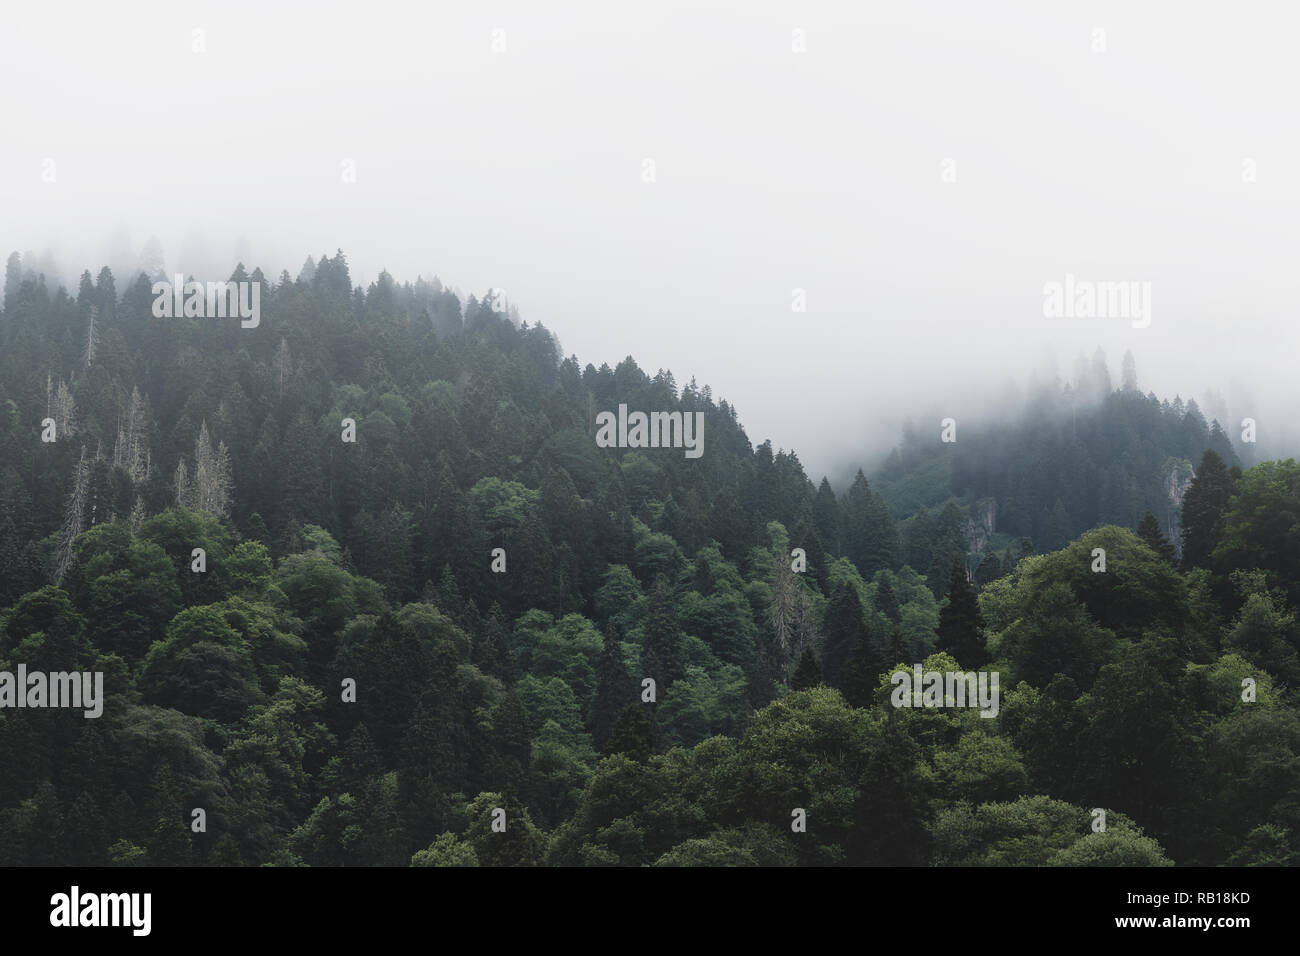 Tops of Tall Green Trees with Dense Fog Rolling In Over Lush Wilderness Stock Photo